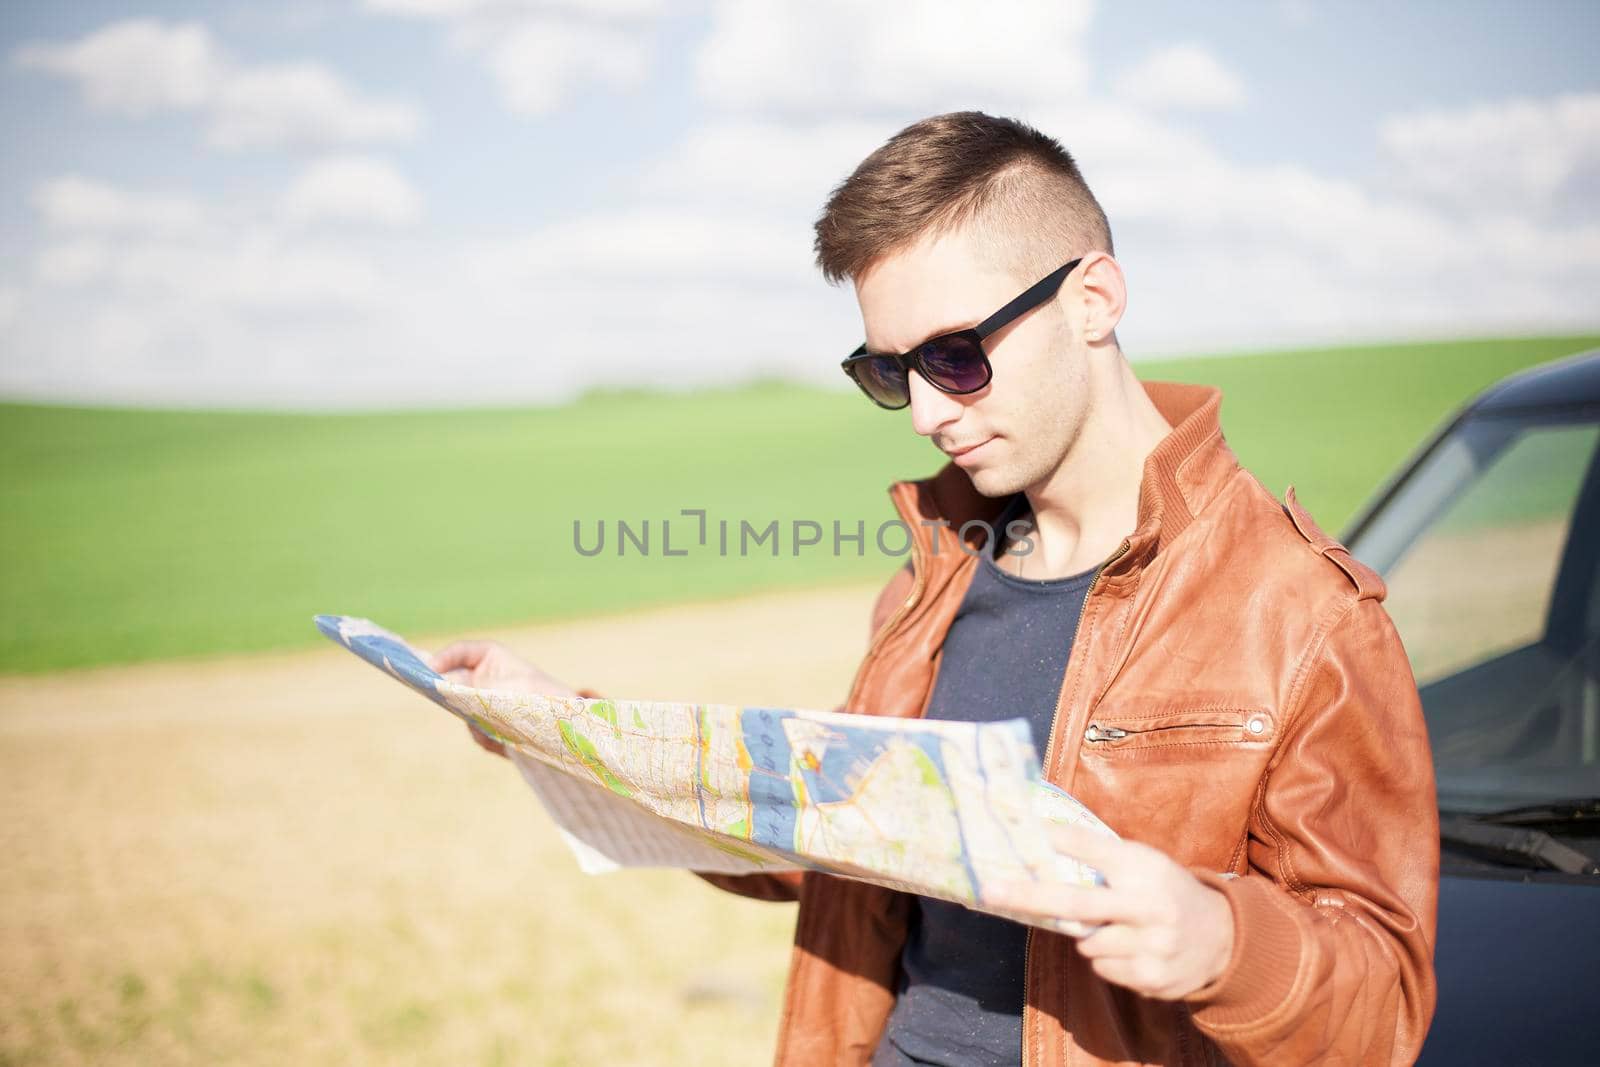 A tourist man next to the car looks at the map of the area for further travel.